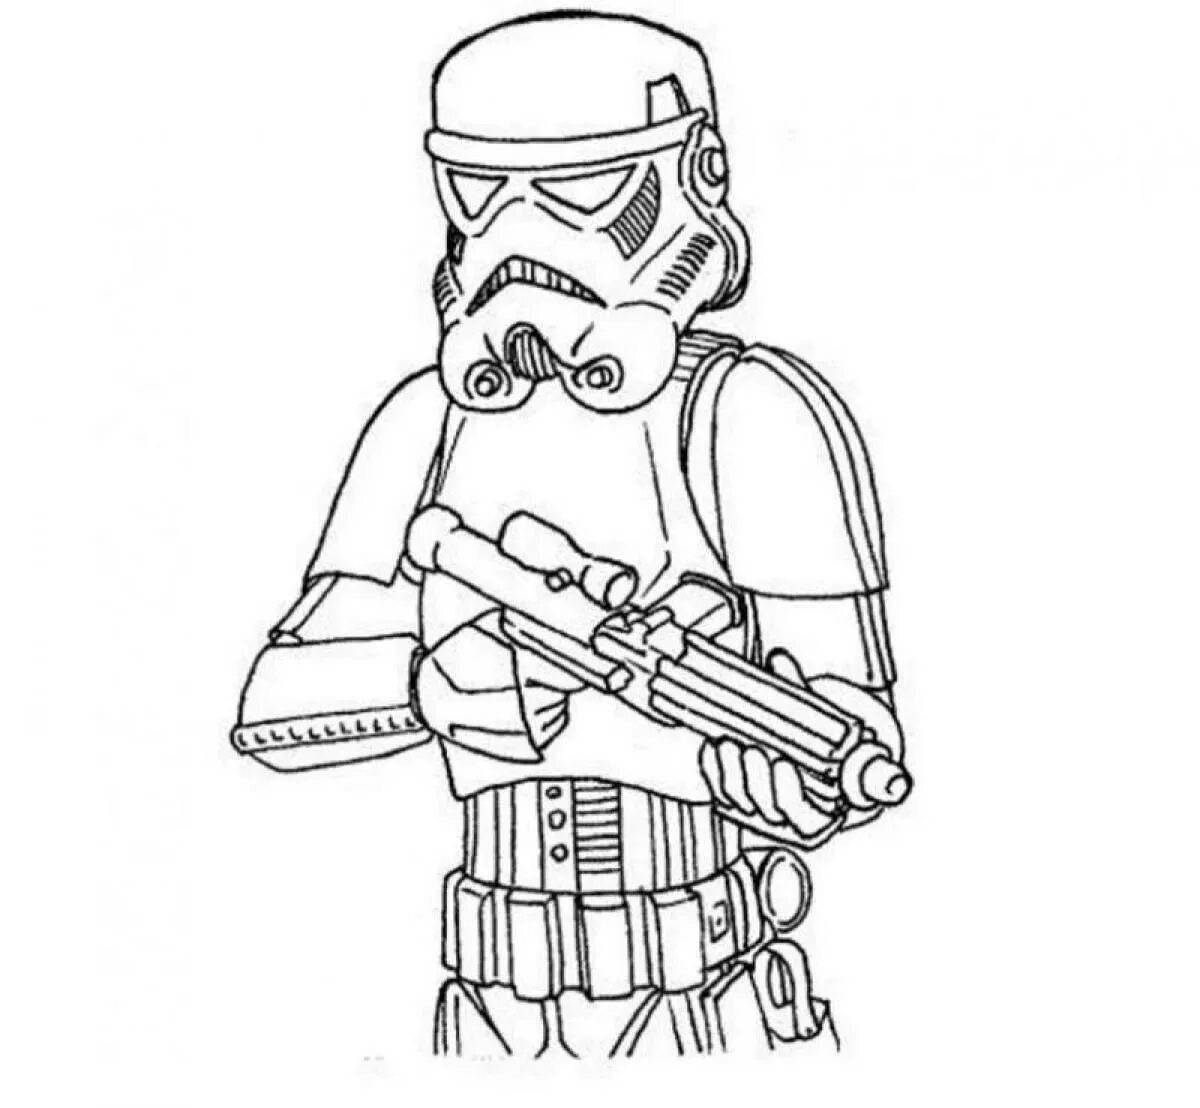 Exciting star wars coloring book